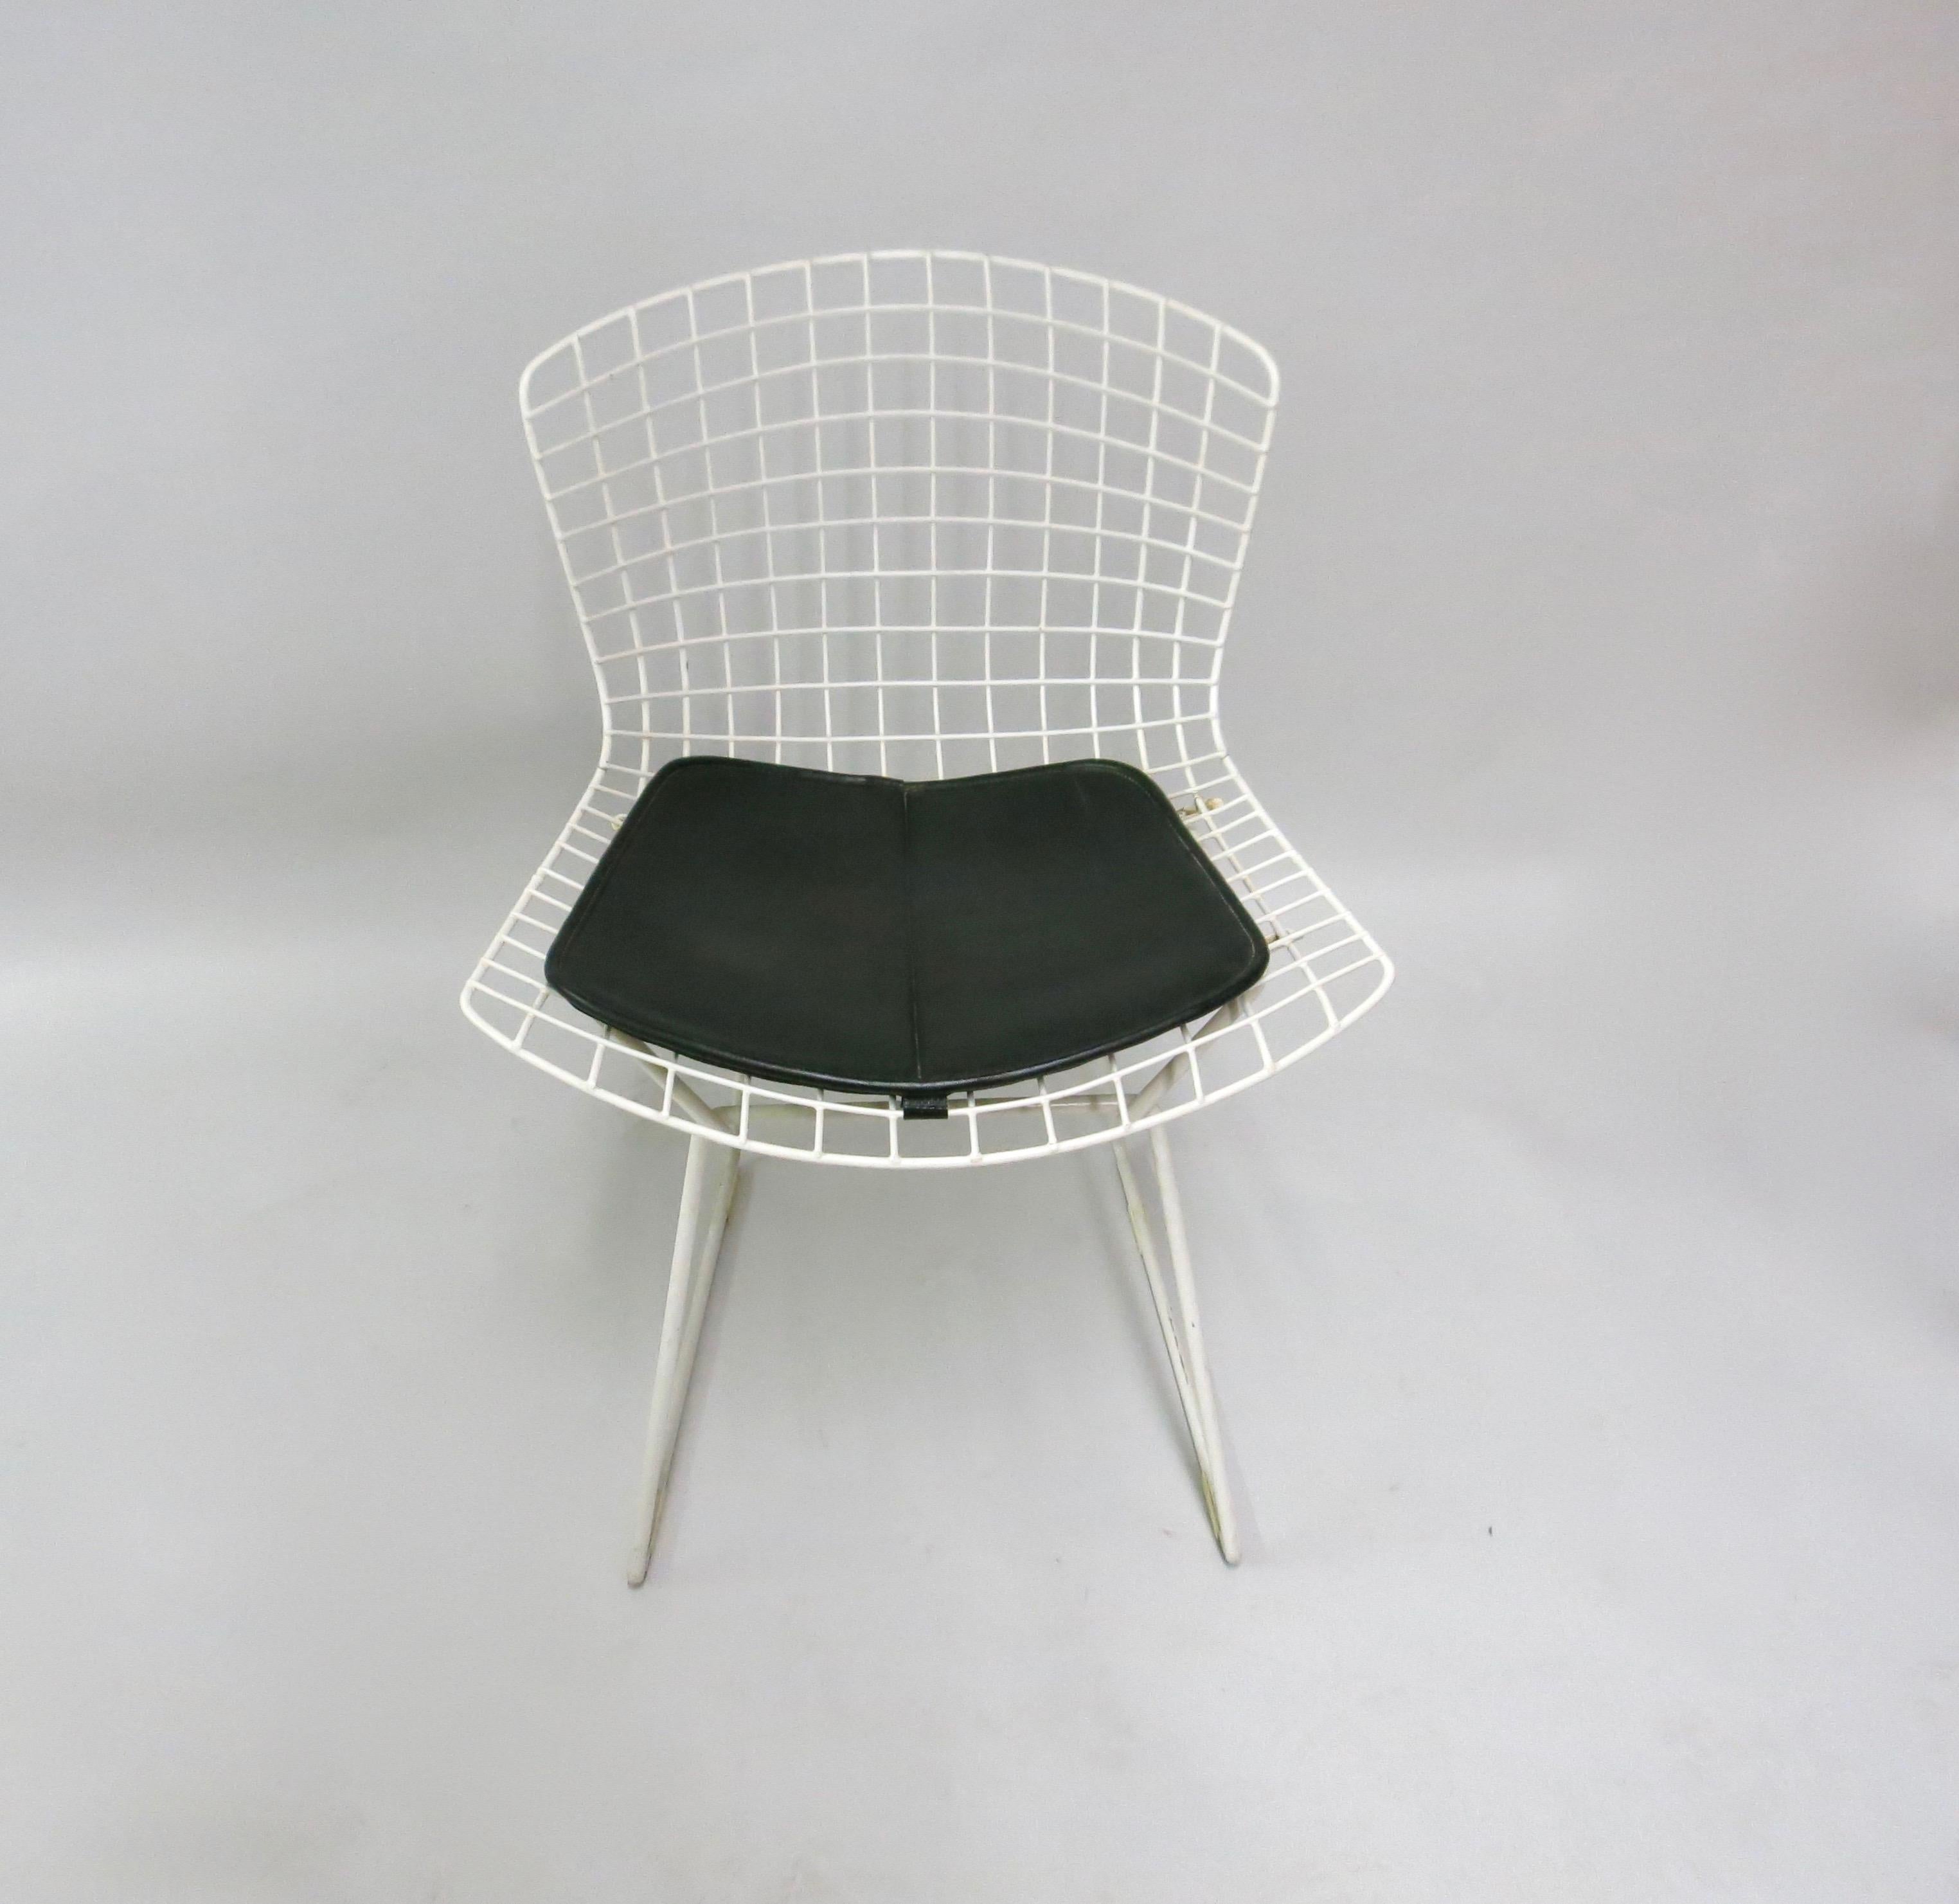 5 white side chairs by Harry Bertoia for Knoll with black leatherette seat with snap button closures on the bottom to attach the cushion to the frame.